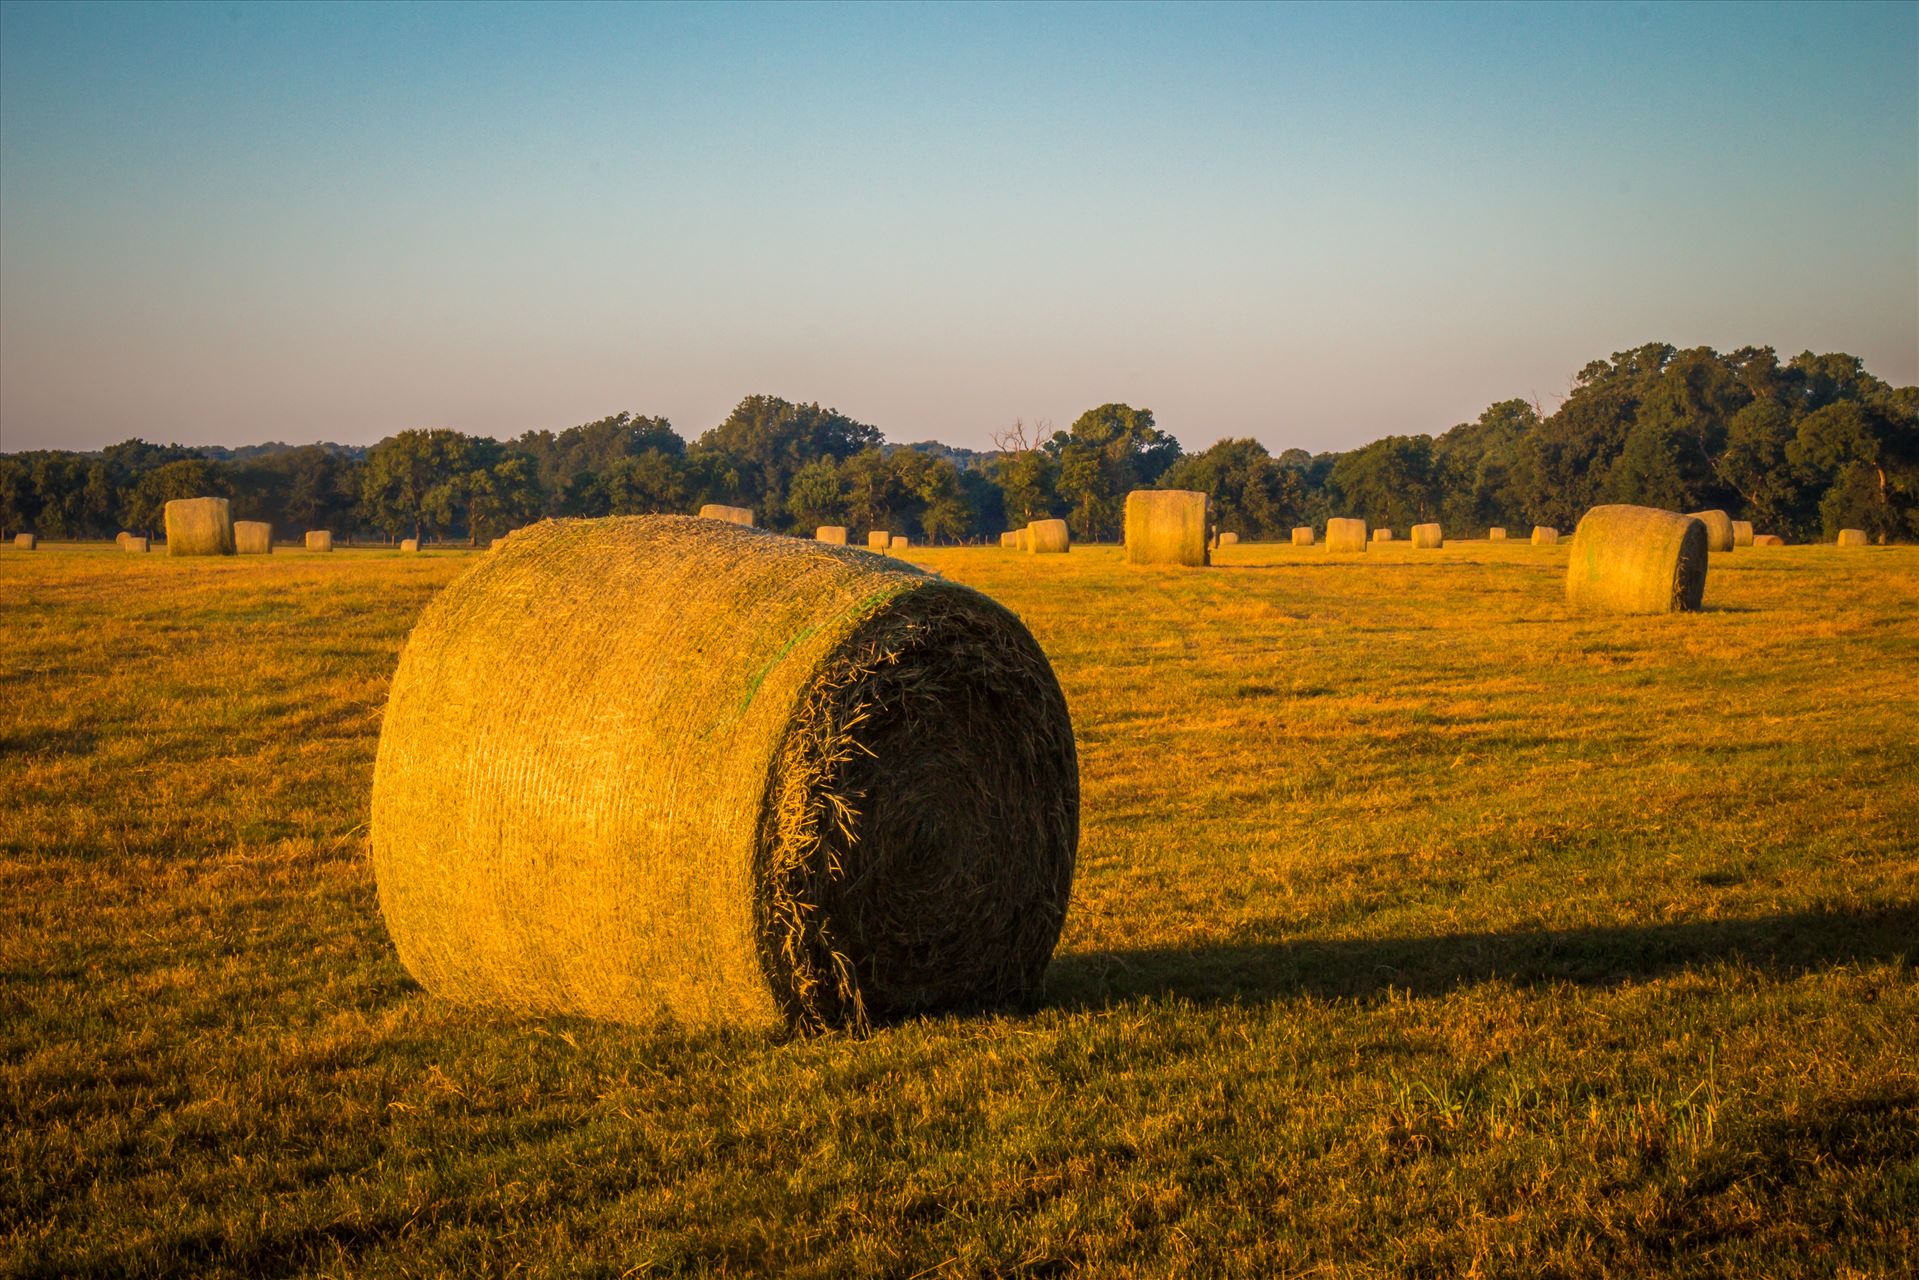 20170819_Hay Field_022.jpg  by Charles Smith Photography